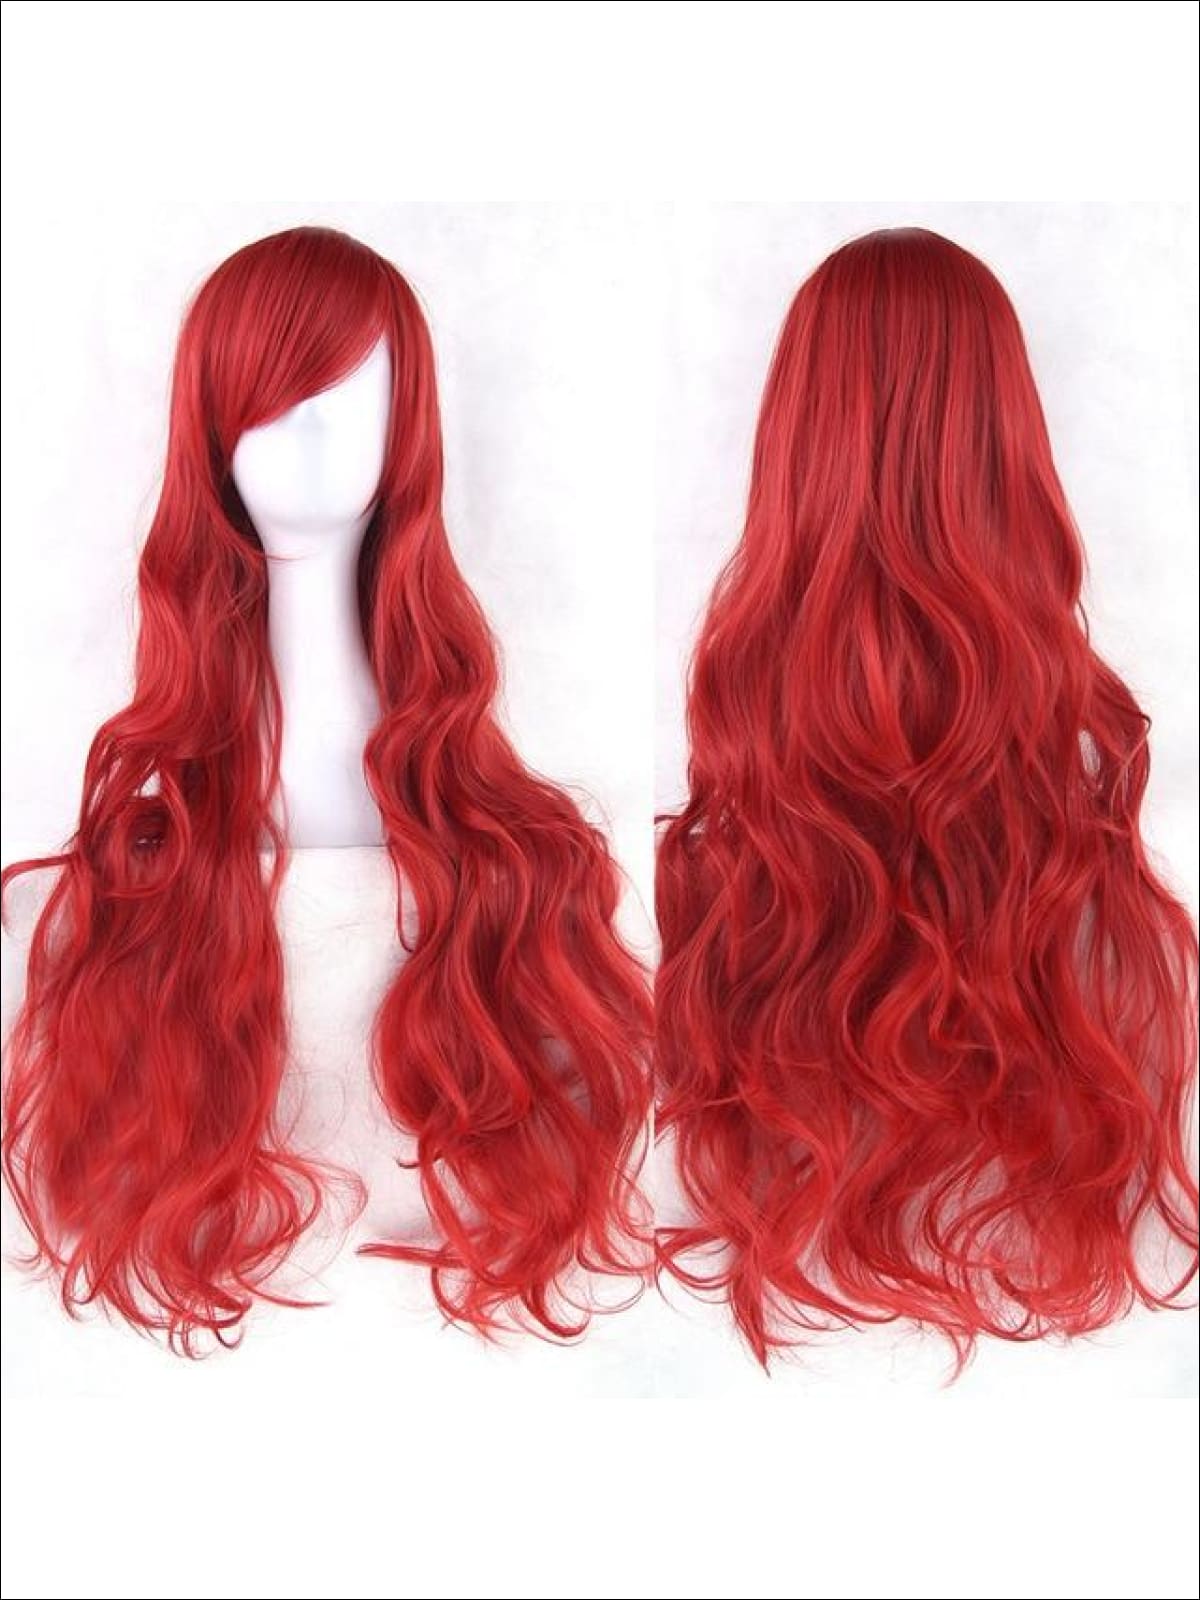 Girls Long Curly Dress Up Wig - Red / One Size - Girls Halloween Costume